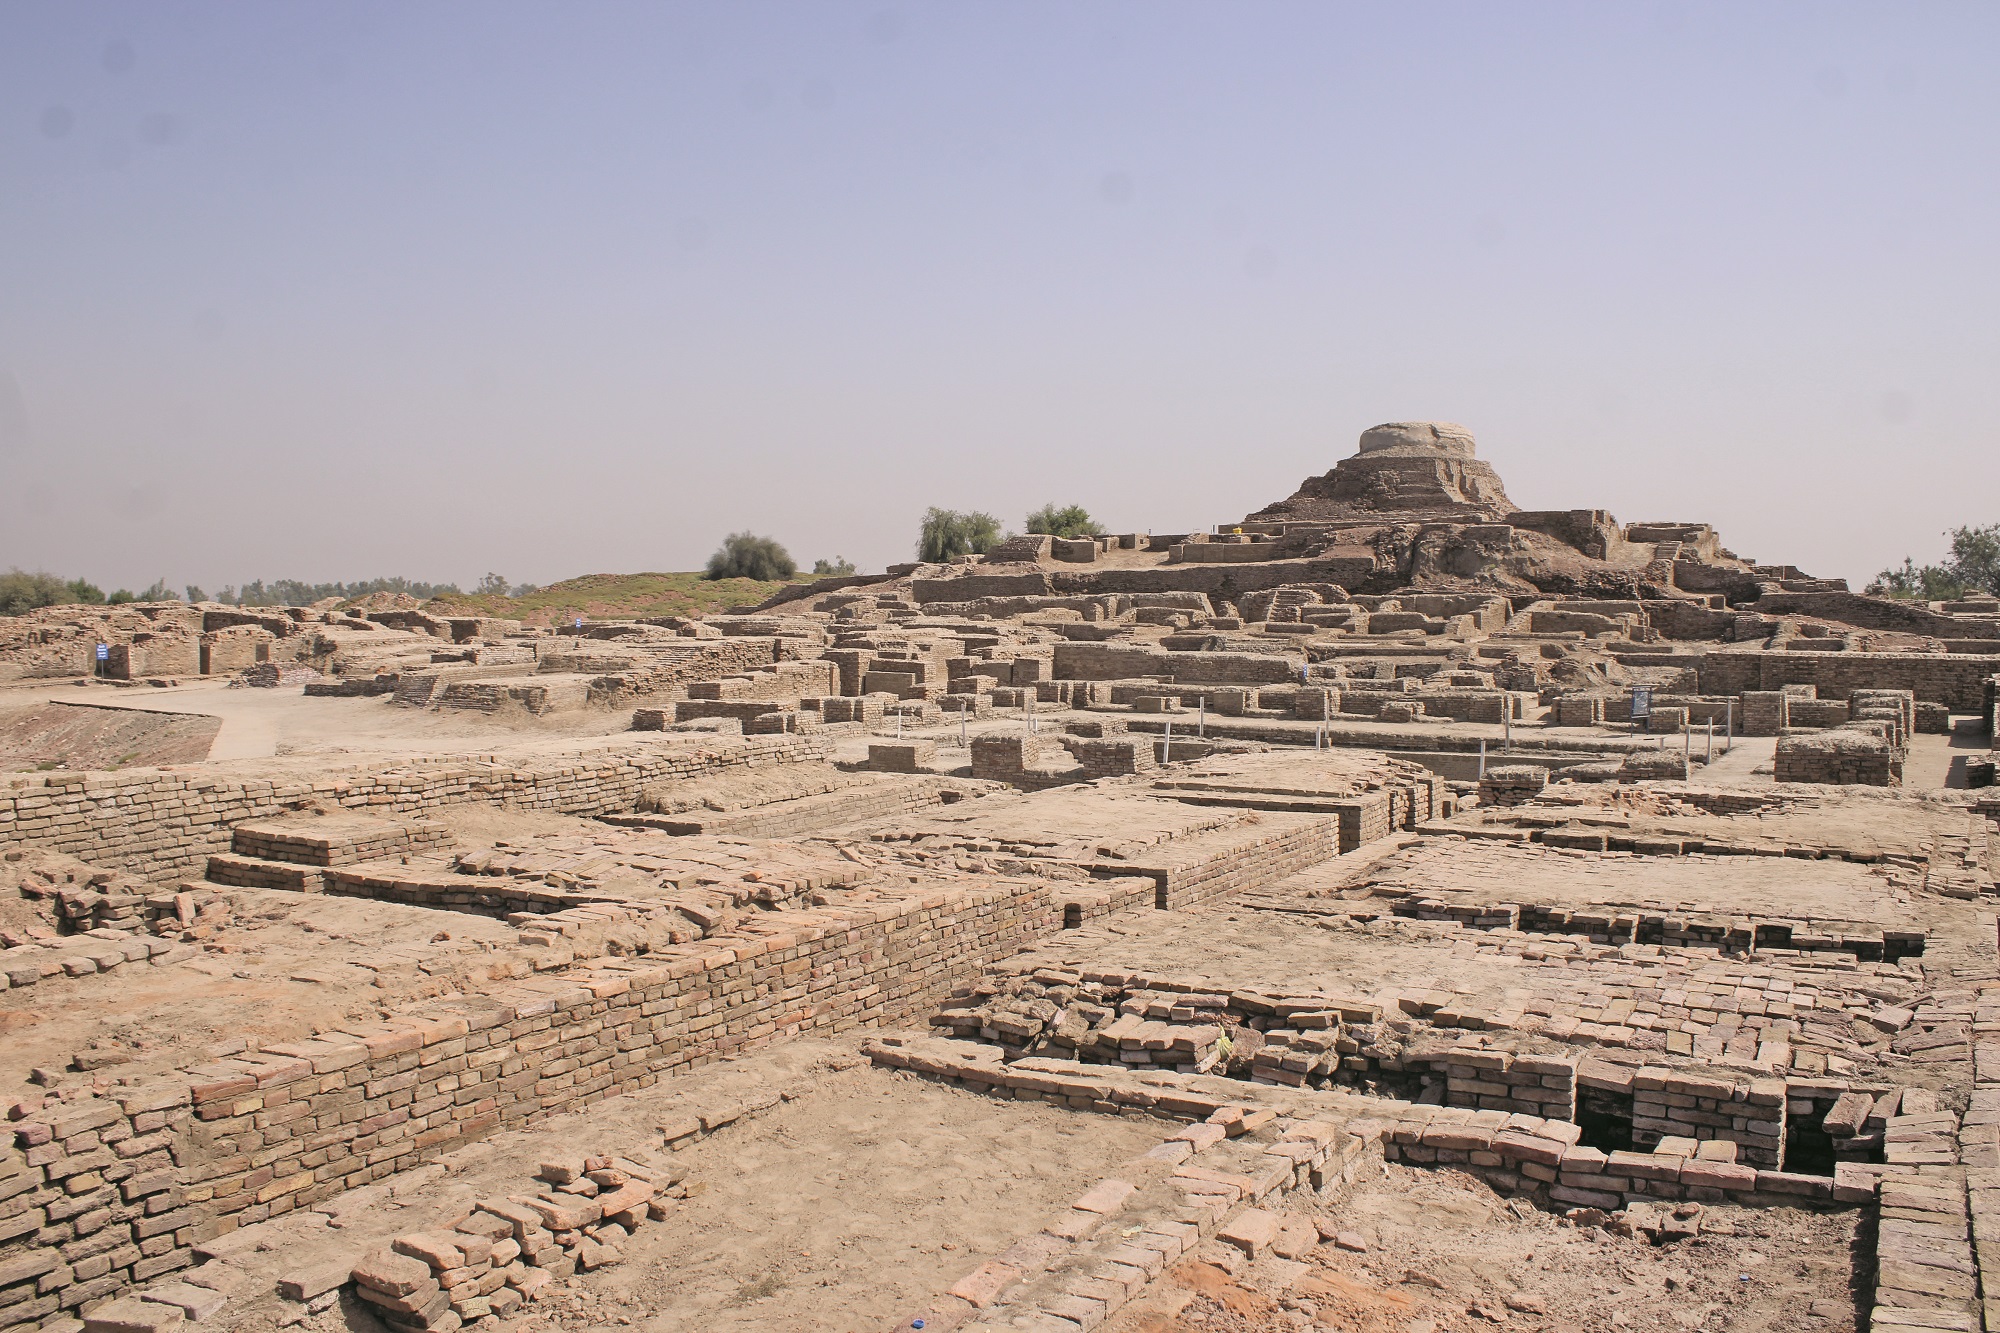 Vue du site de Mohenjo-Daro. © Culture, Tourism and Antiquities Department, Government of Sindh, Naveed Ahmed